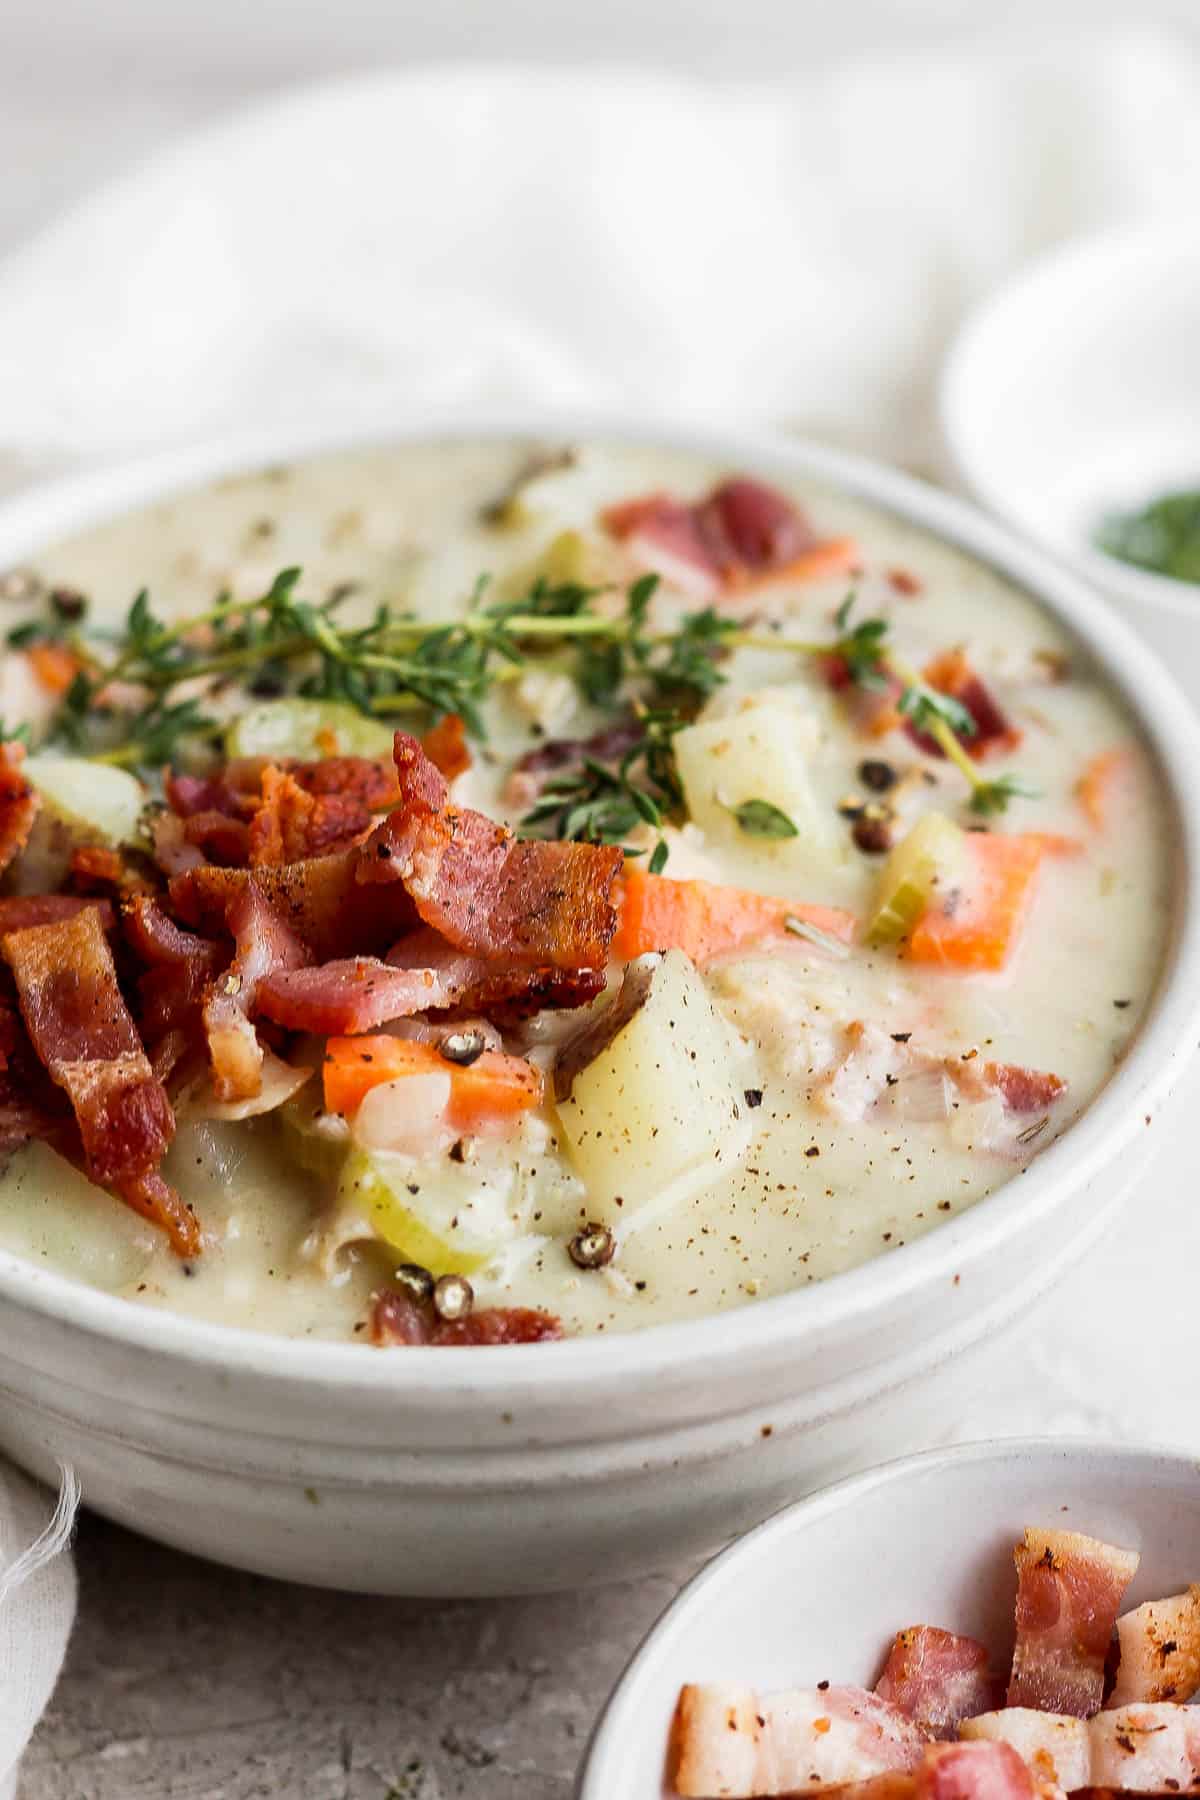 Another few of dairy free clam chowder in a bowl with bacon and herbs on top.